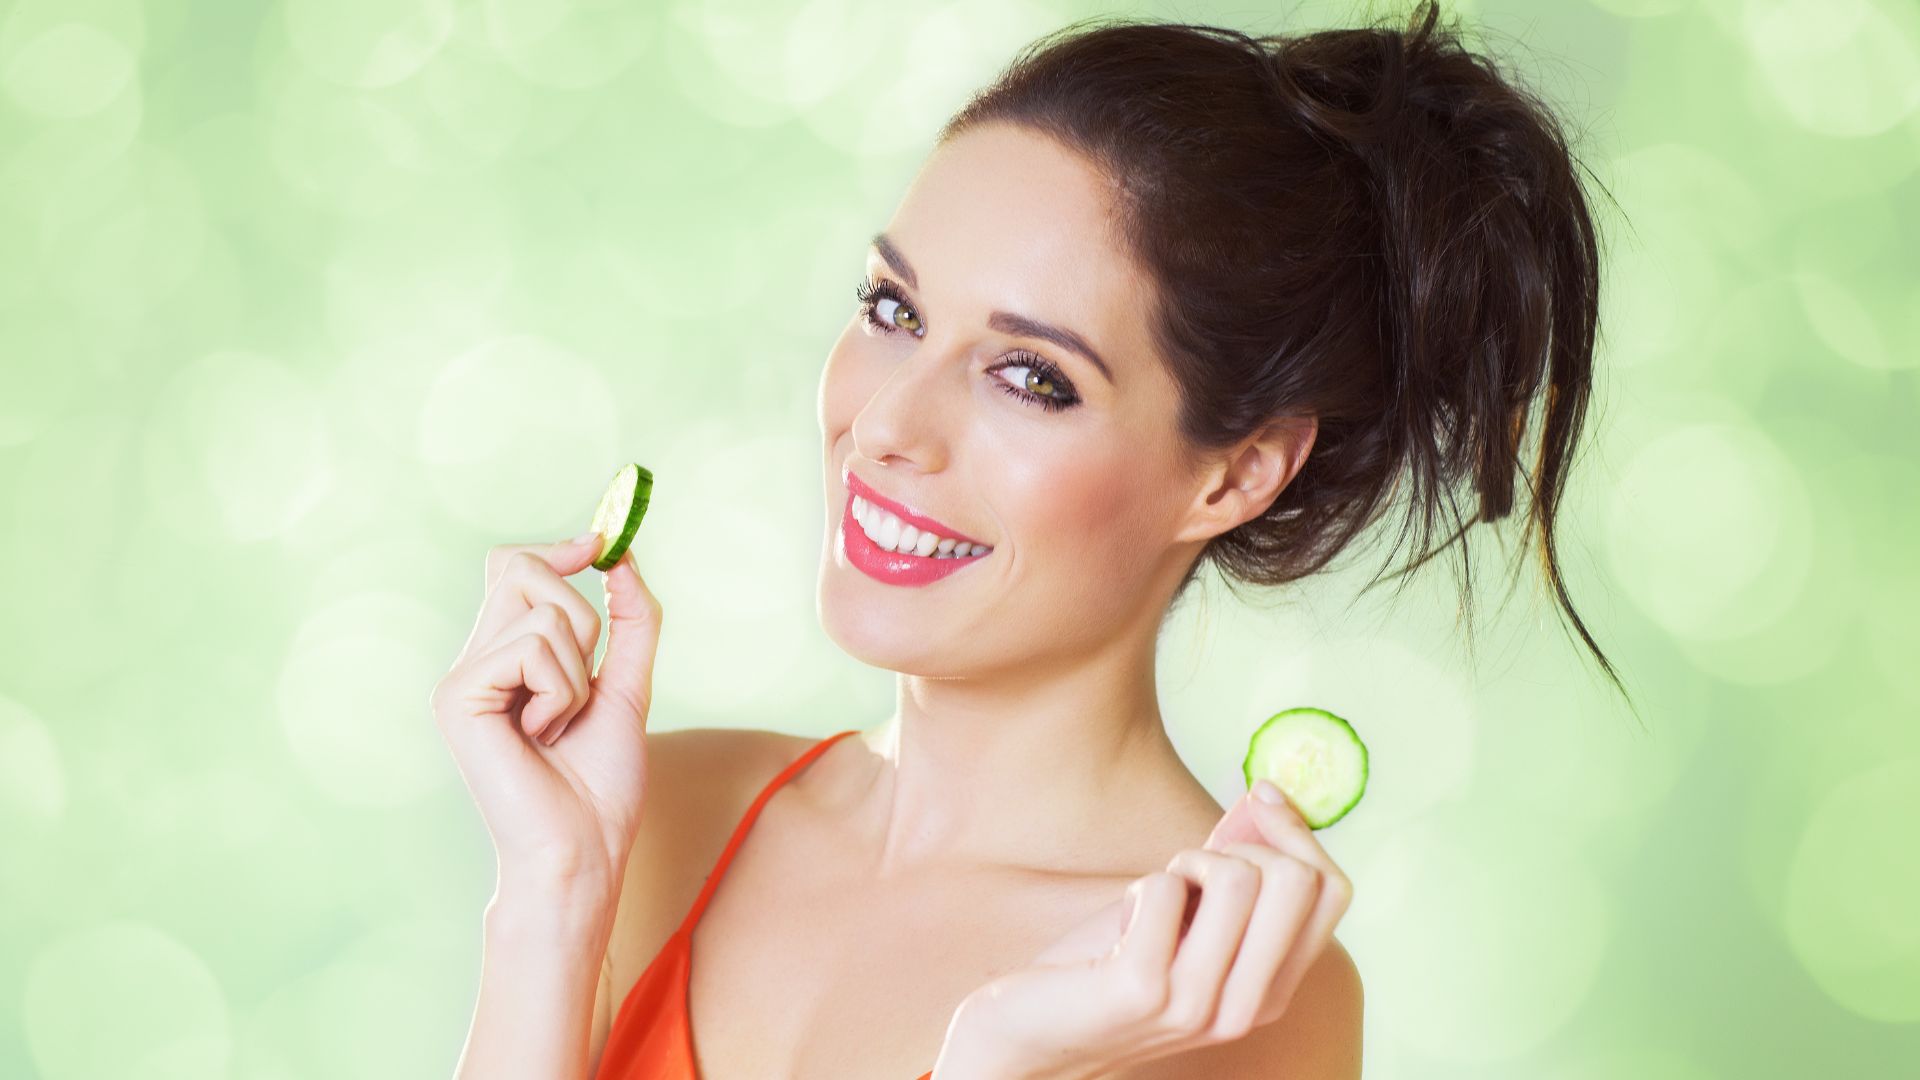 The Complete Guide to Cucumber Benefits for Healthy, Glowing Skin